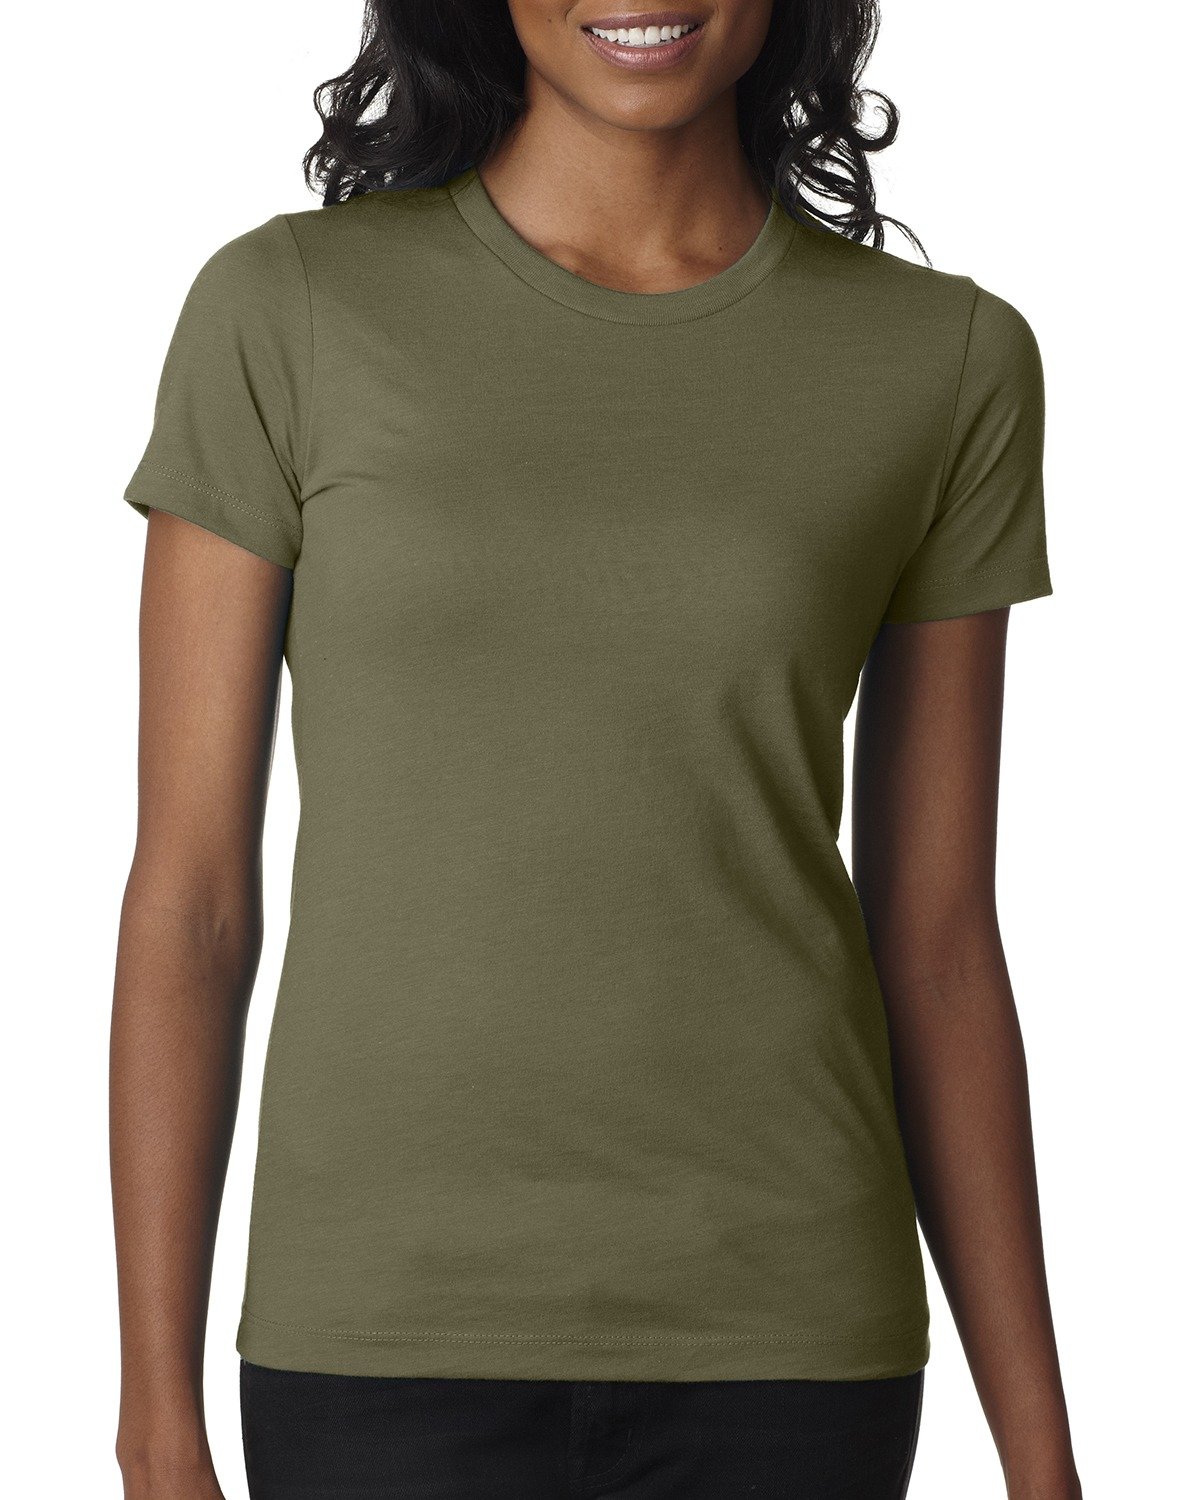 Ladies Printed T-shirts Suppliers 19162646 - Wholesale Manufacturers and  Exporters